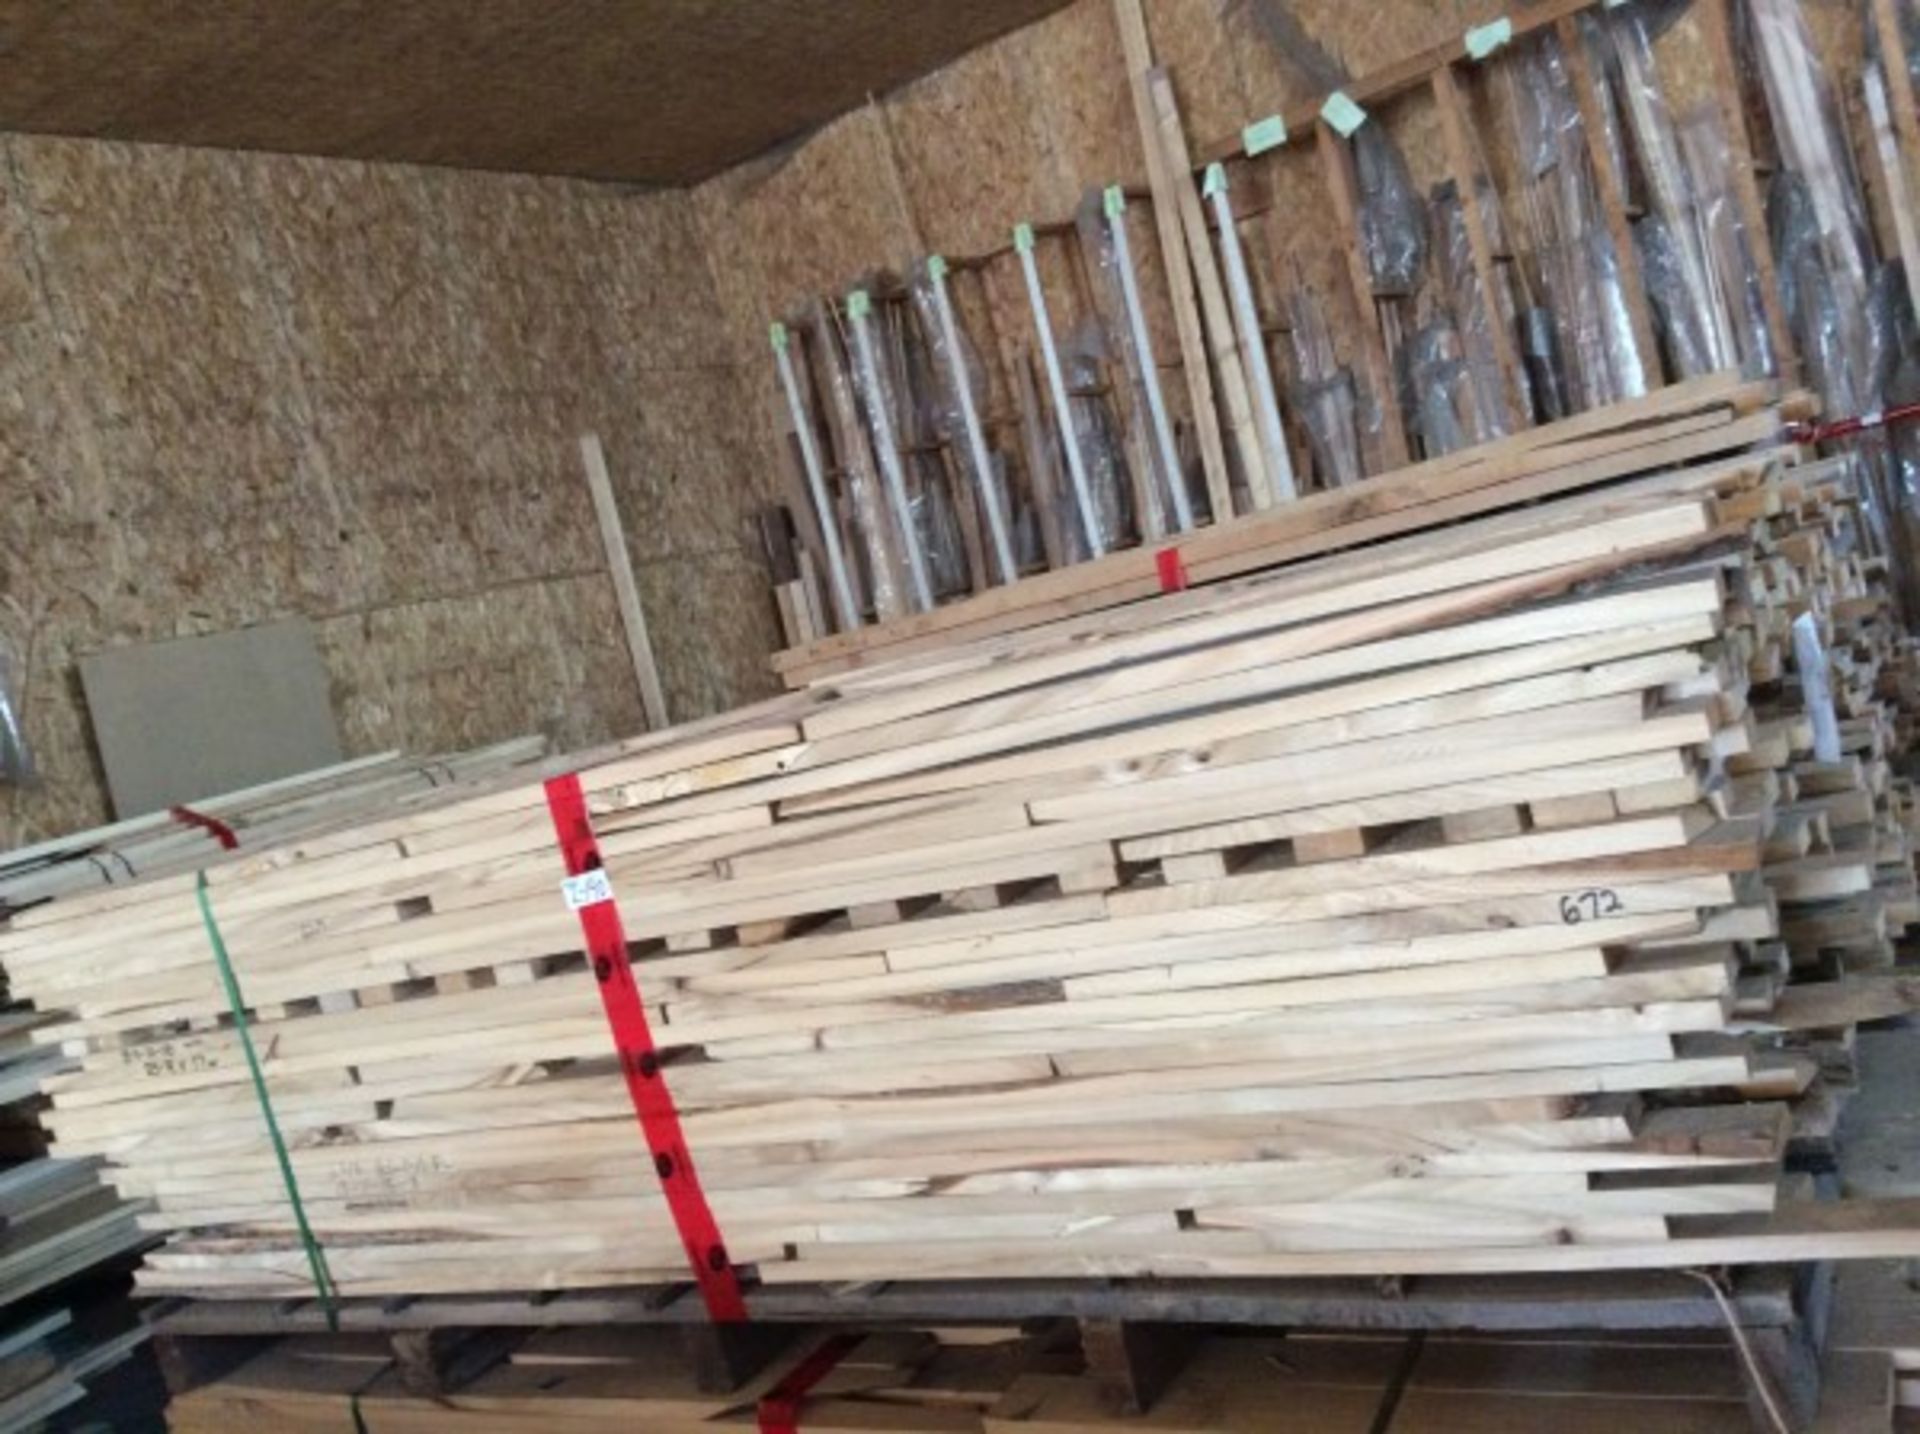 2 SKID LIFTS OF ELM ROUGH CUT LUMBER - APPROX 425 PCS - A - Image 2 of 4